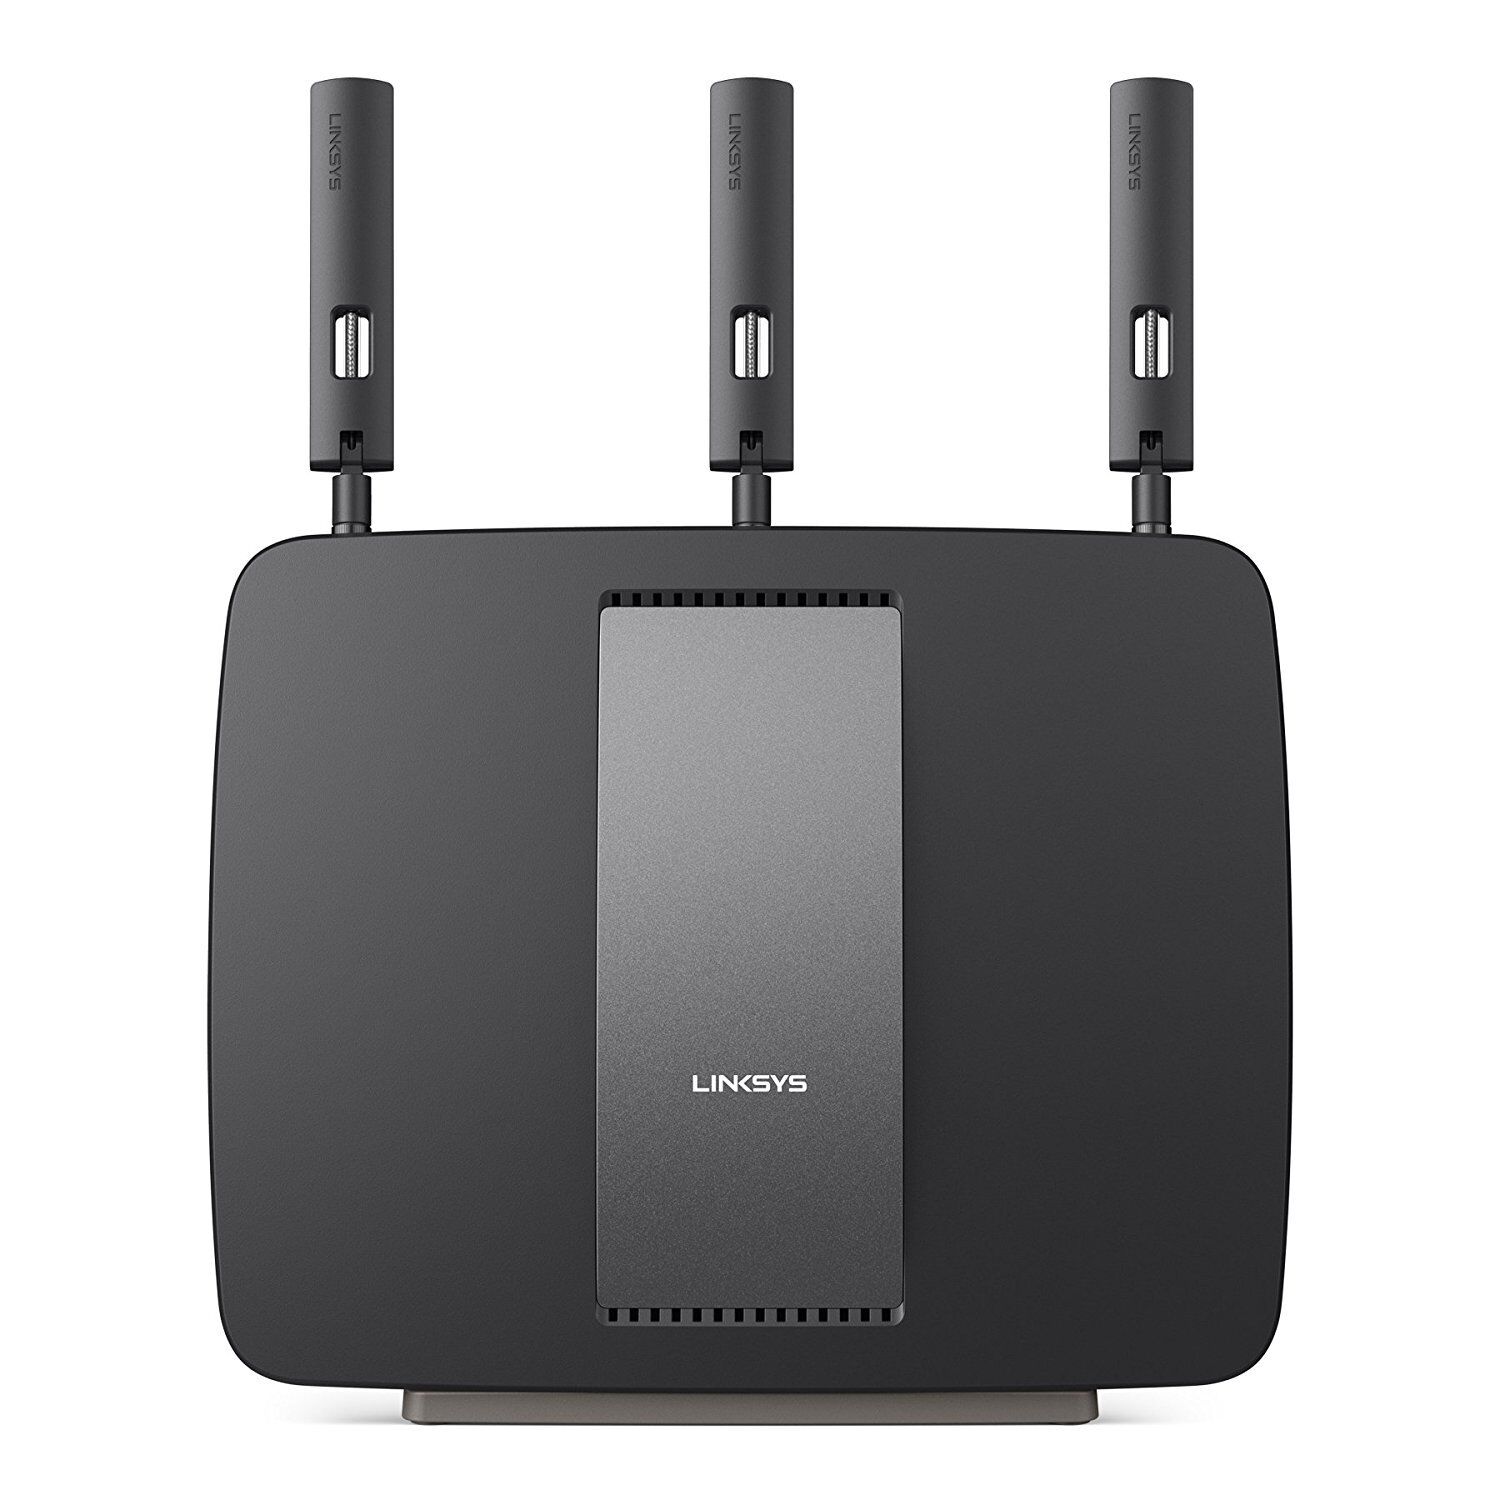 Linksys AC3200 Tri-Band Smart Wi-Fi Router with Gigabit and USB (EA9200)™